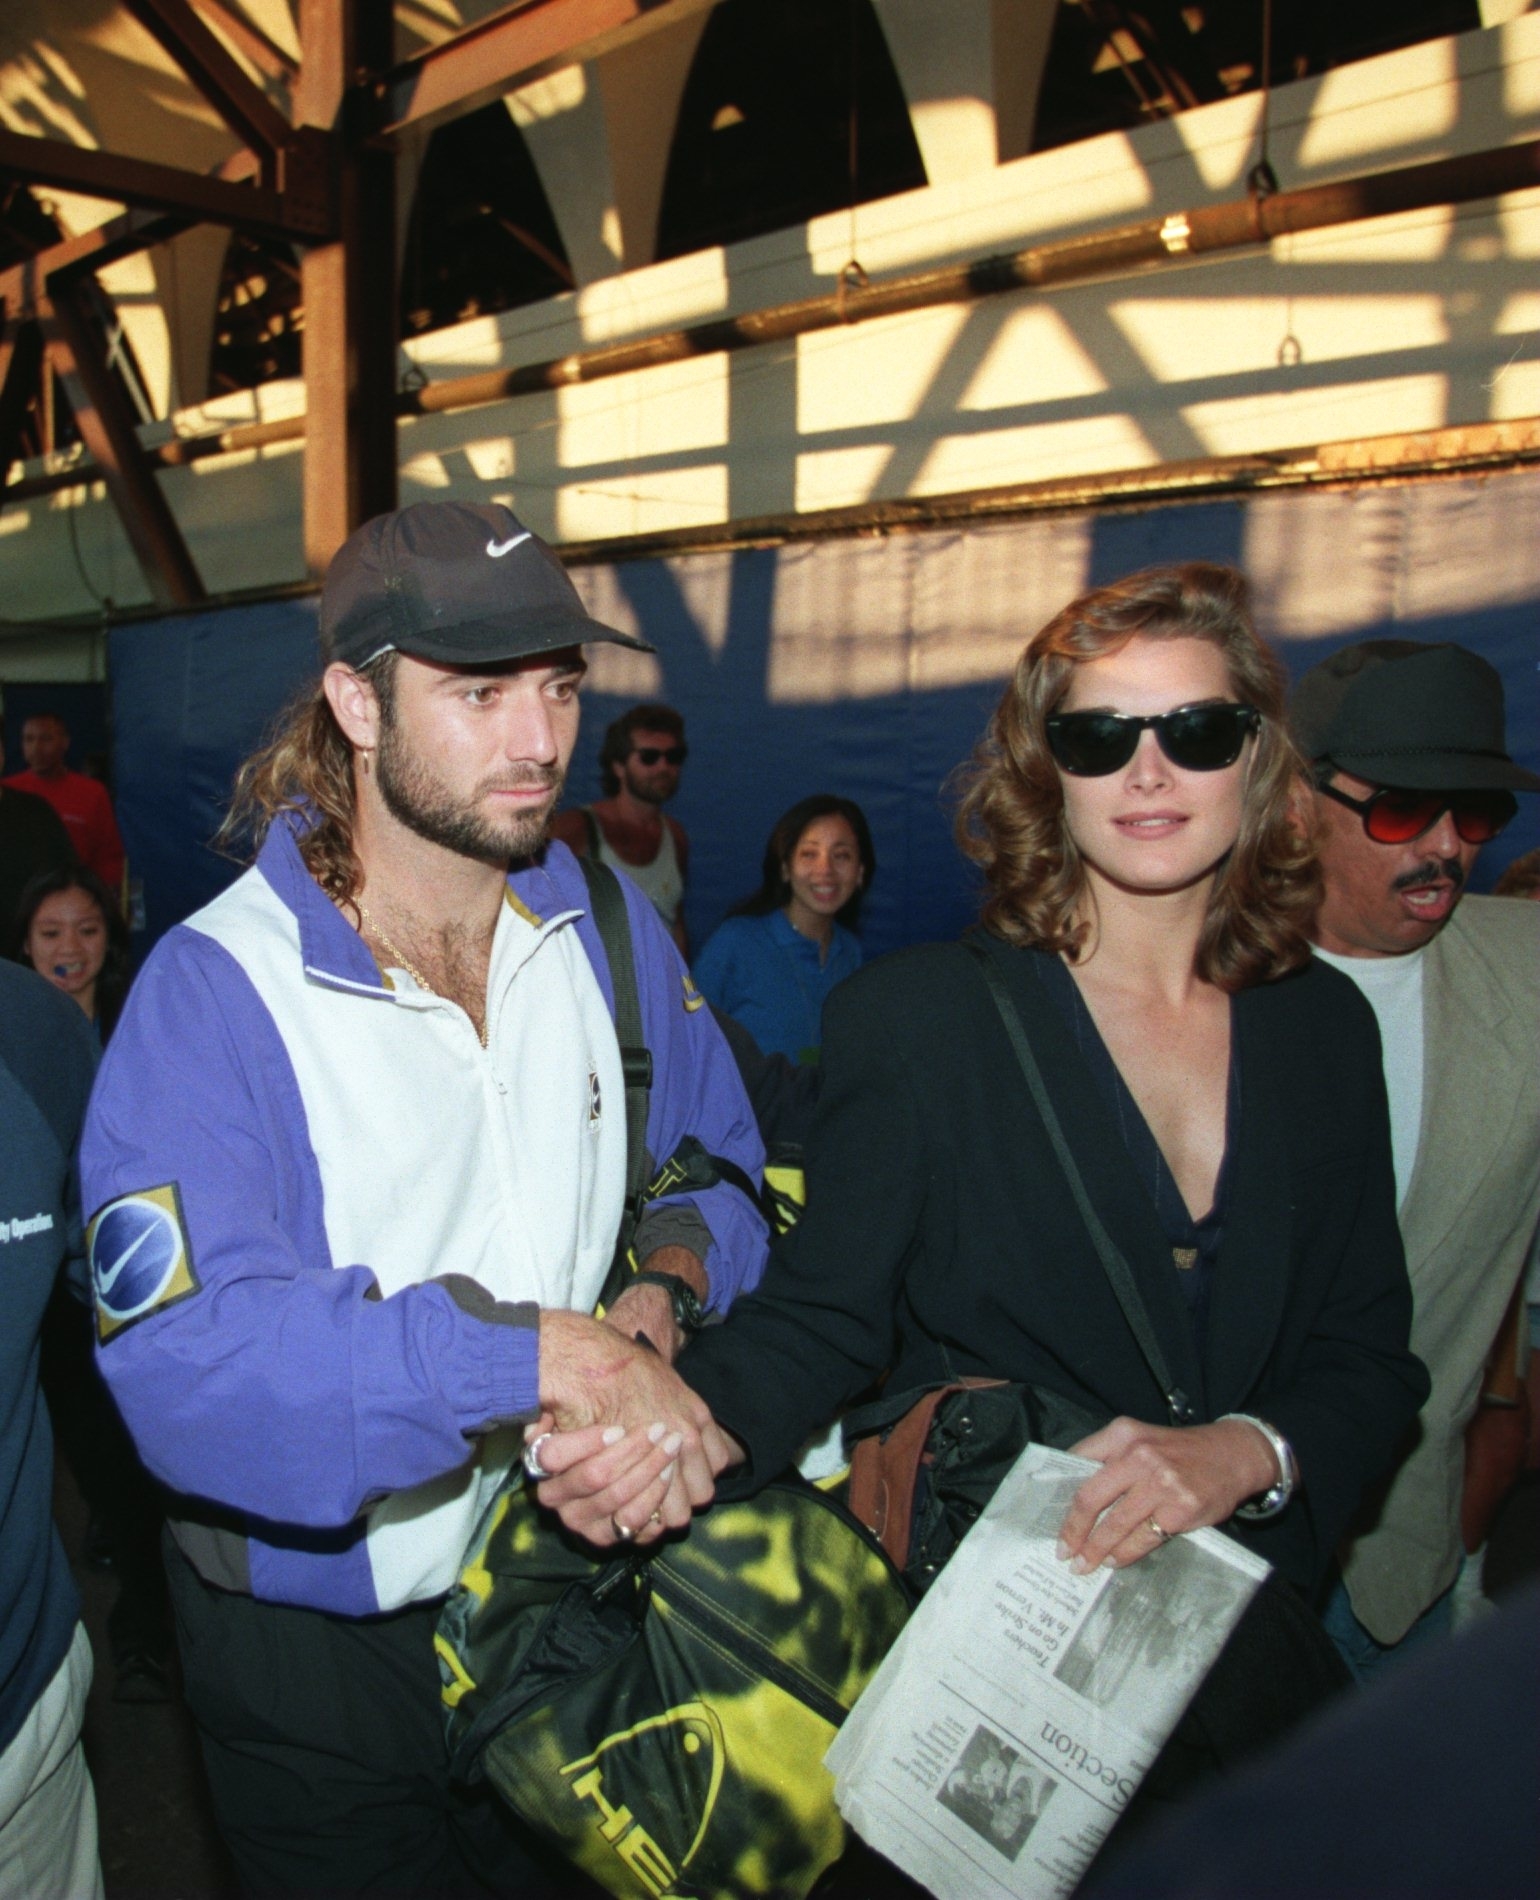 Brooke Shields and Andre Agassi hold hands as they walk through a crowd; he&#x27;s wearing a Nike cap and jacket and she&#x27;s wearing sunglasses